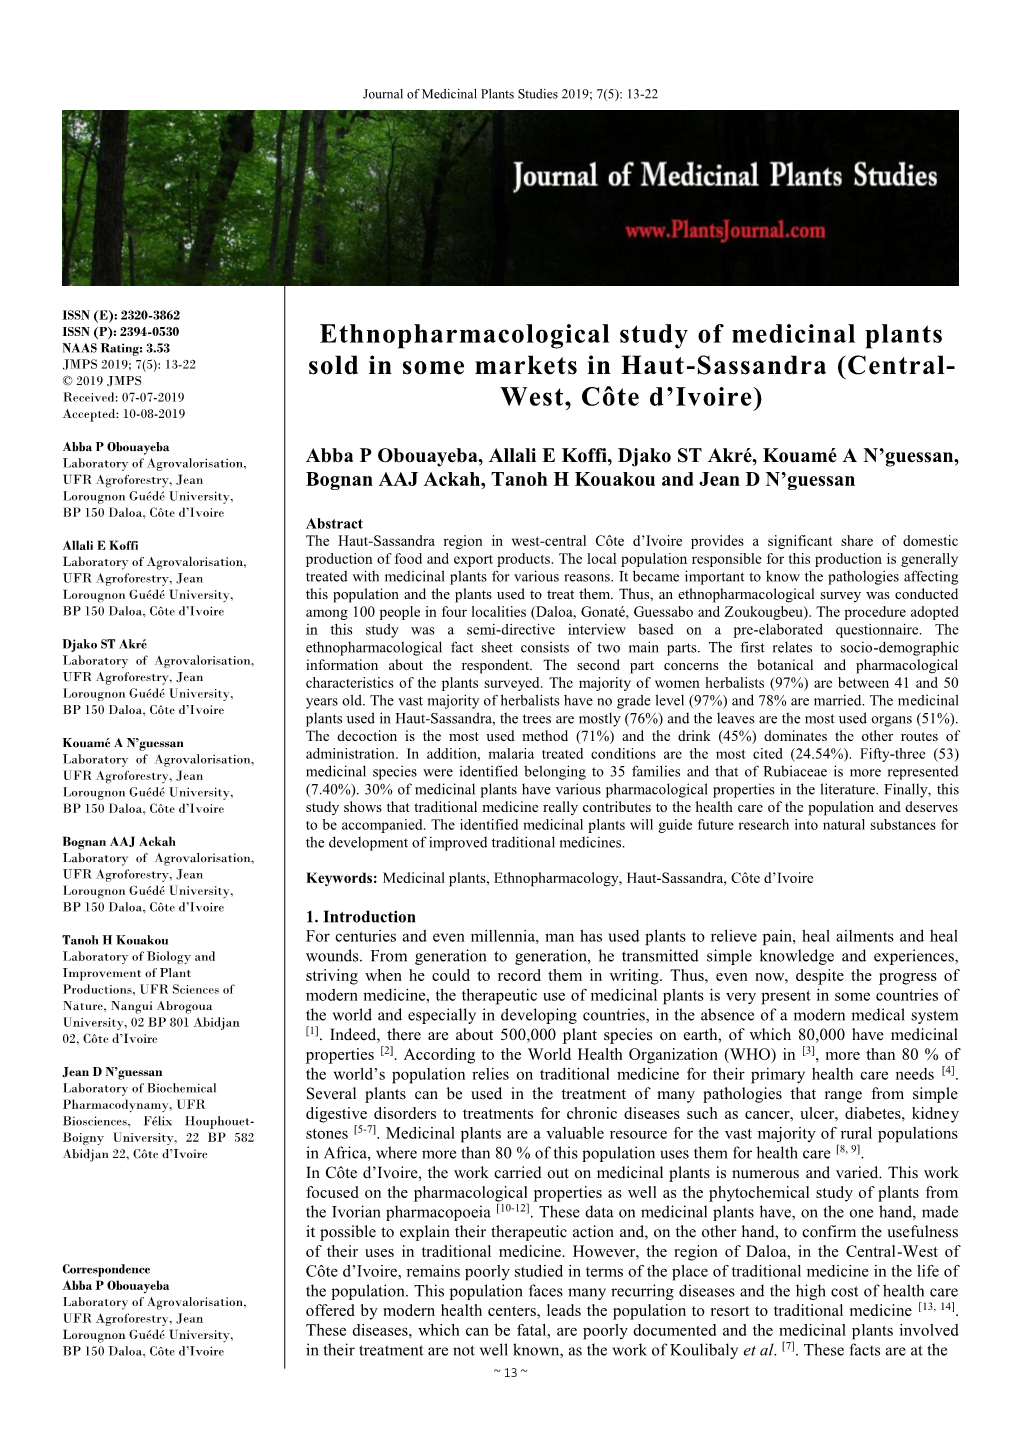 Ethnopharmacological Study of Medicinal Plants Sold in Some